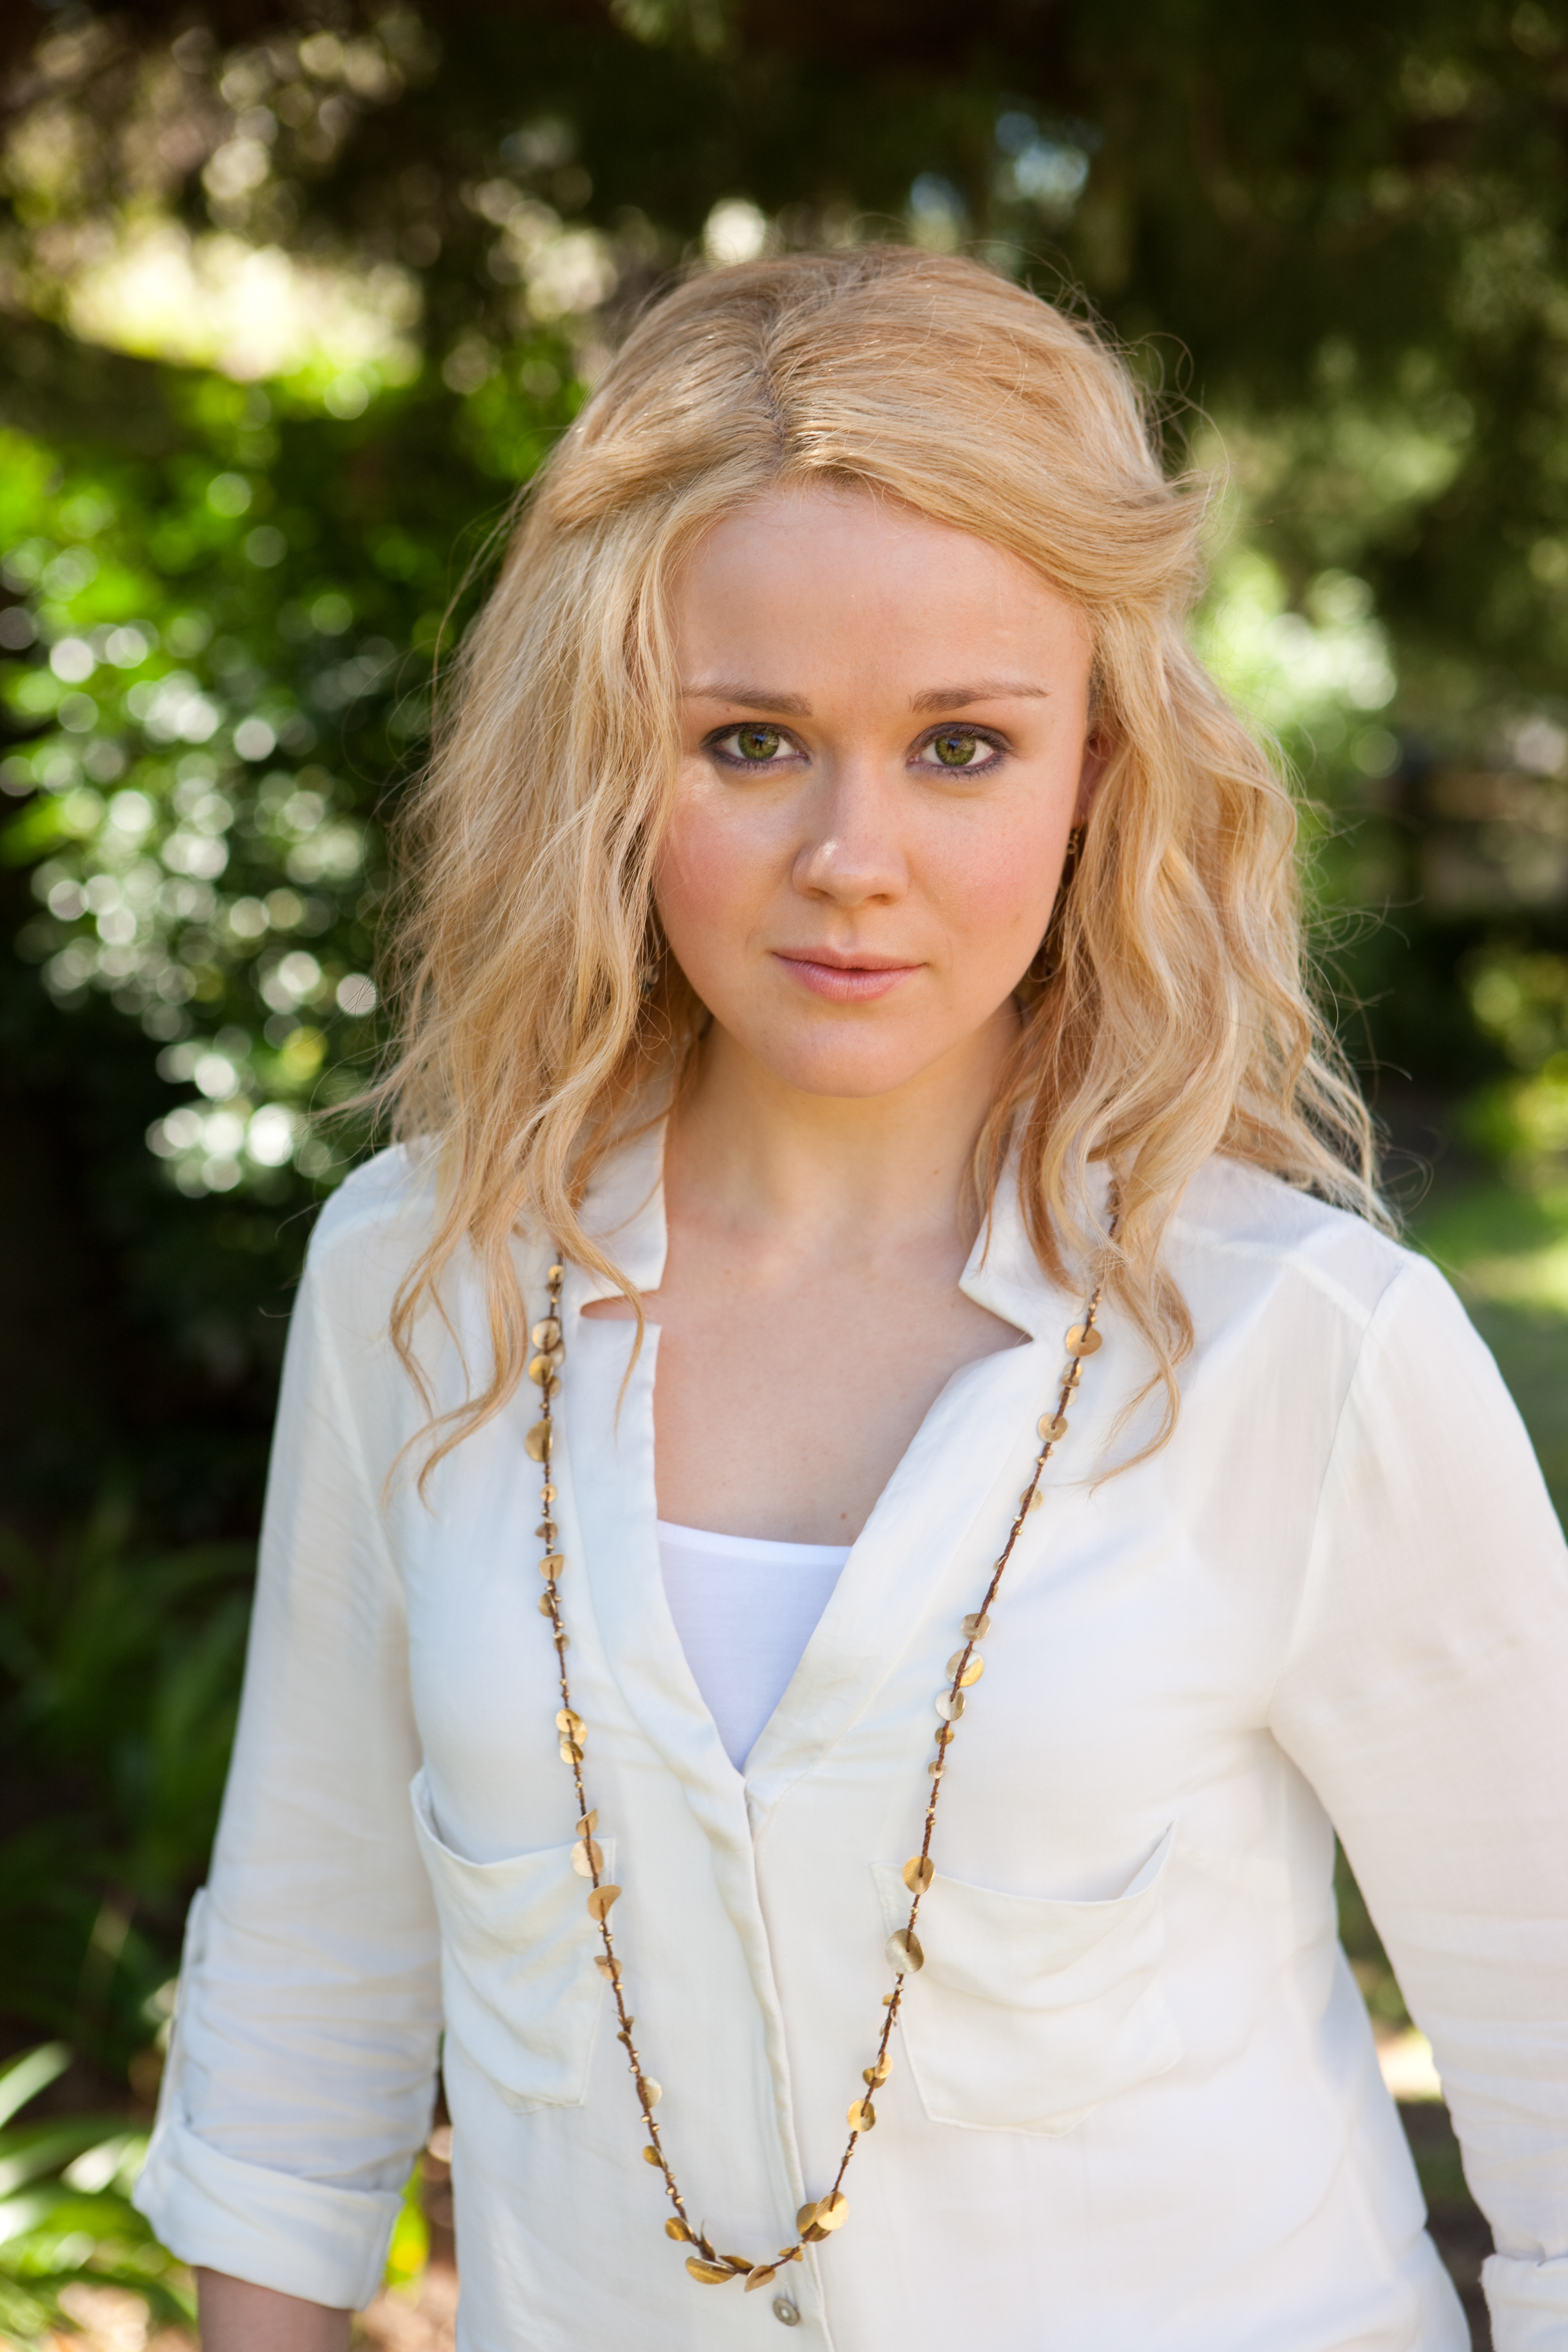 Arianwen Parkes-Lockwood as Samantha in A Place to Call Home Season 2.